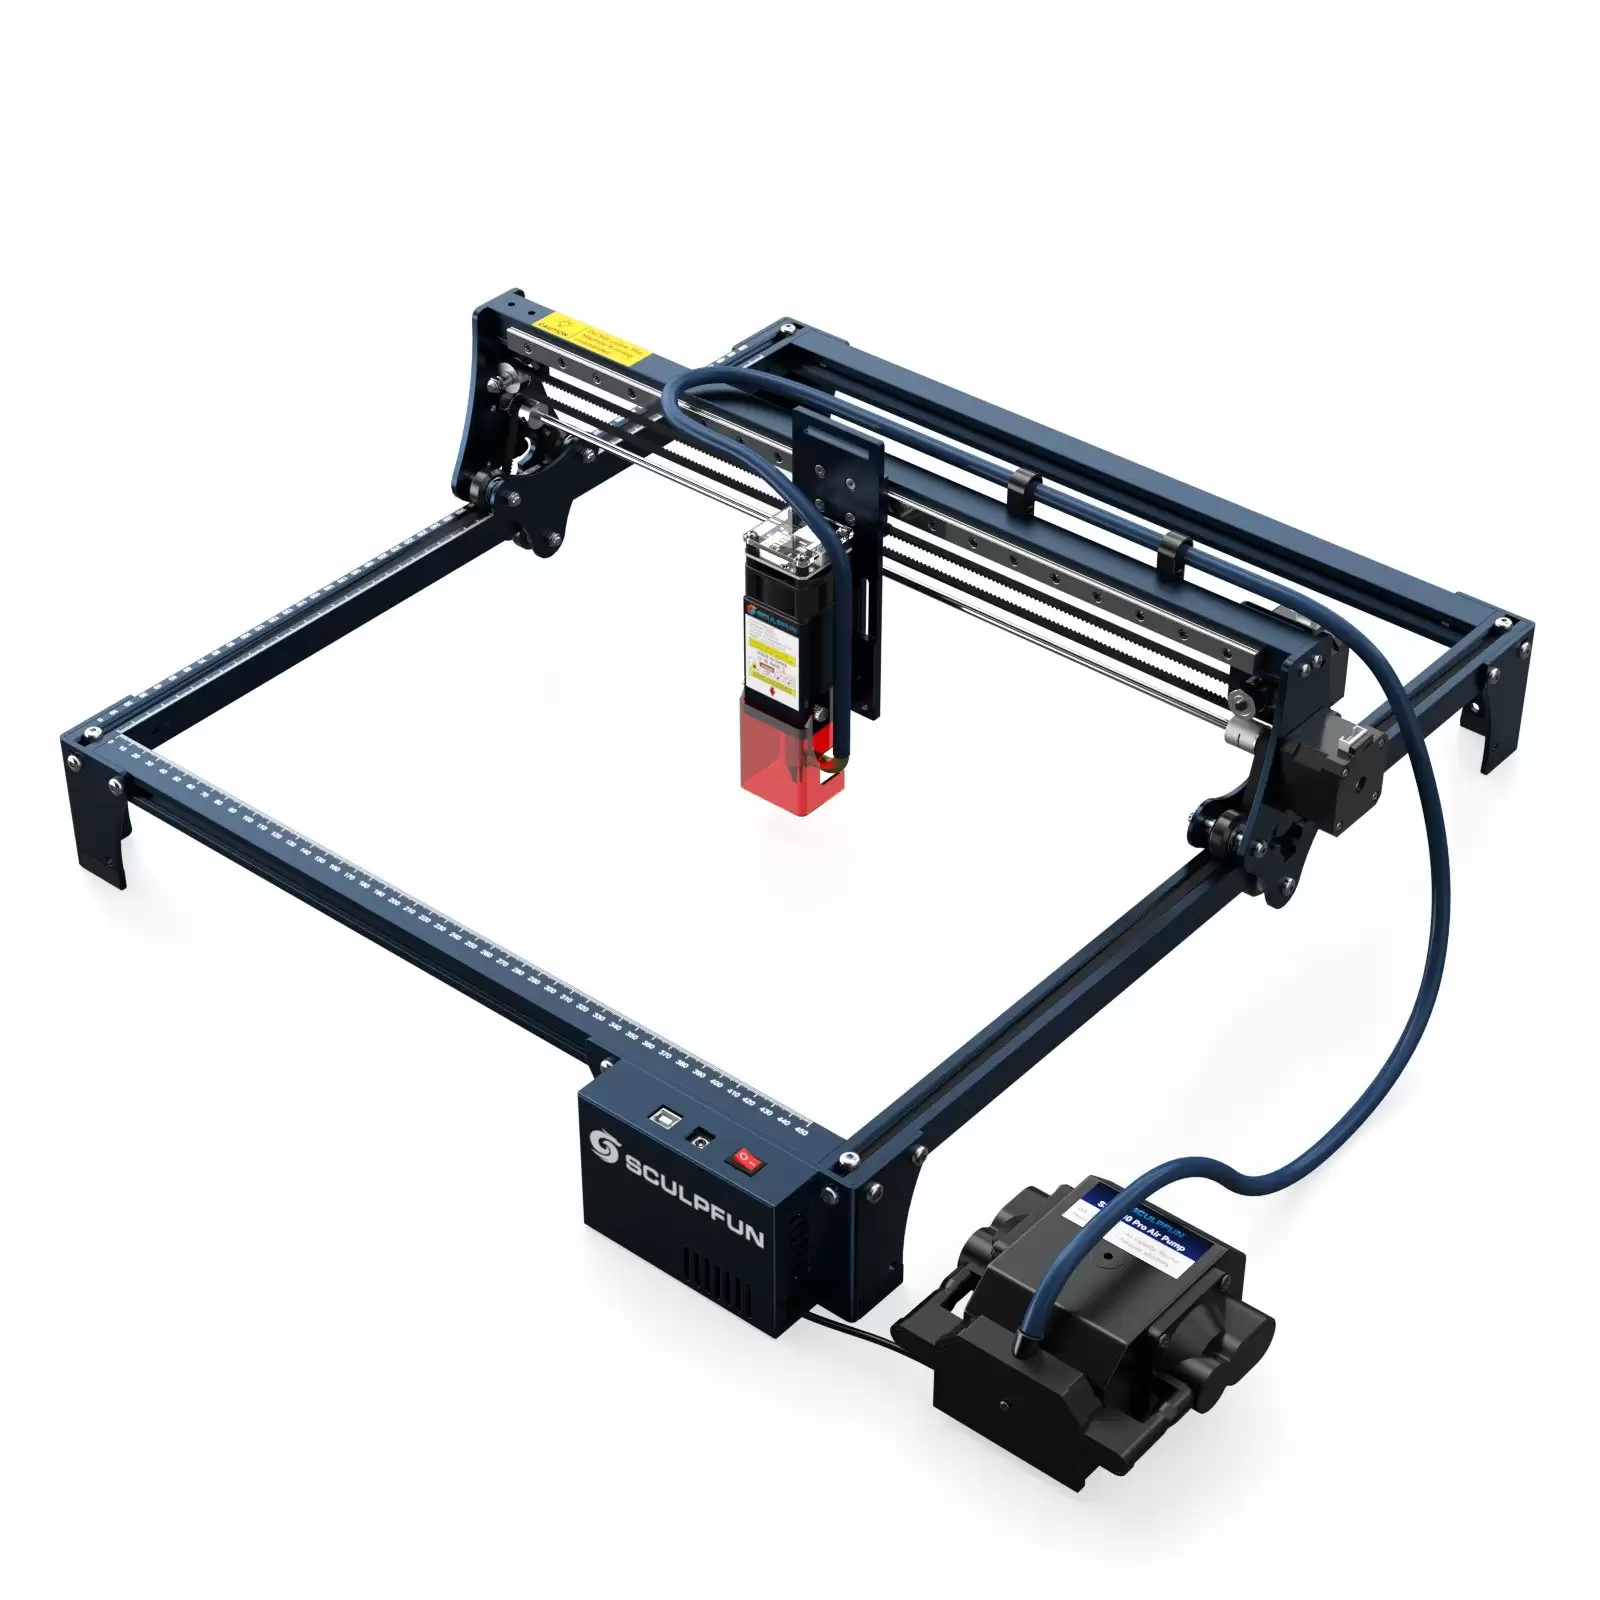 Order In Just $479.99 [us Warehouse] 52% Off Culpfun S30 Pro 10w Laser Engraver At Tomtop